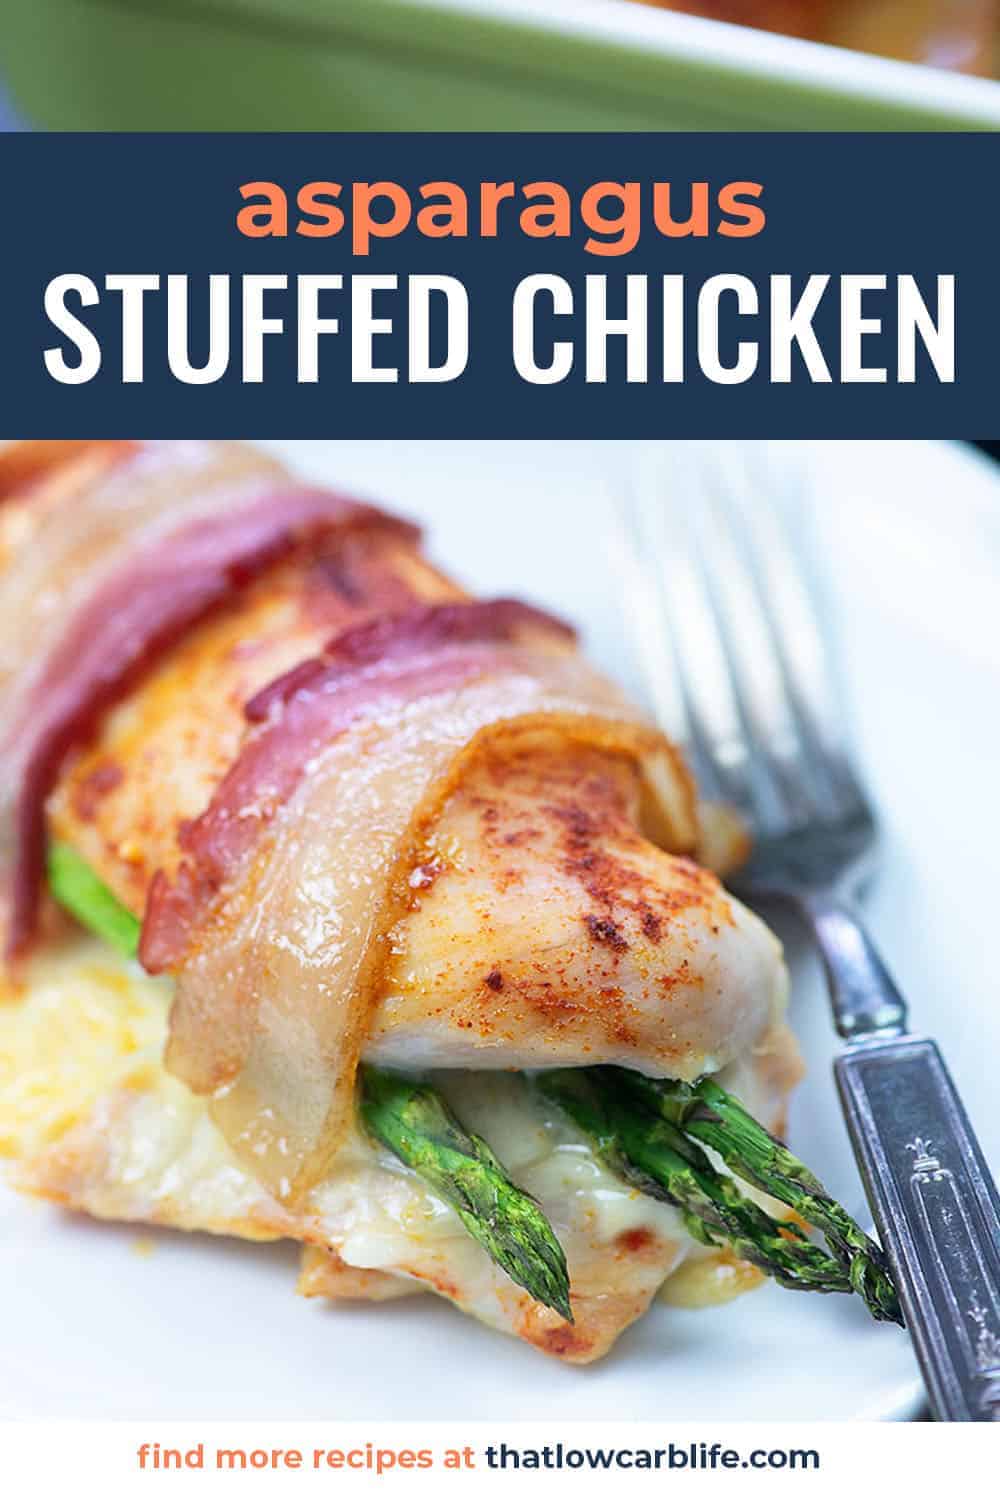 Asparagus Stuffed Chicken on white plate